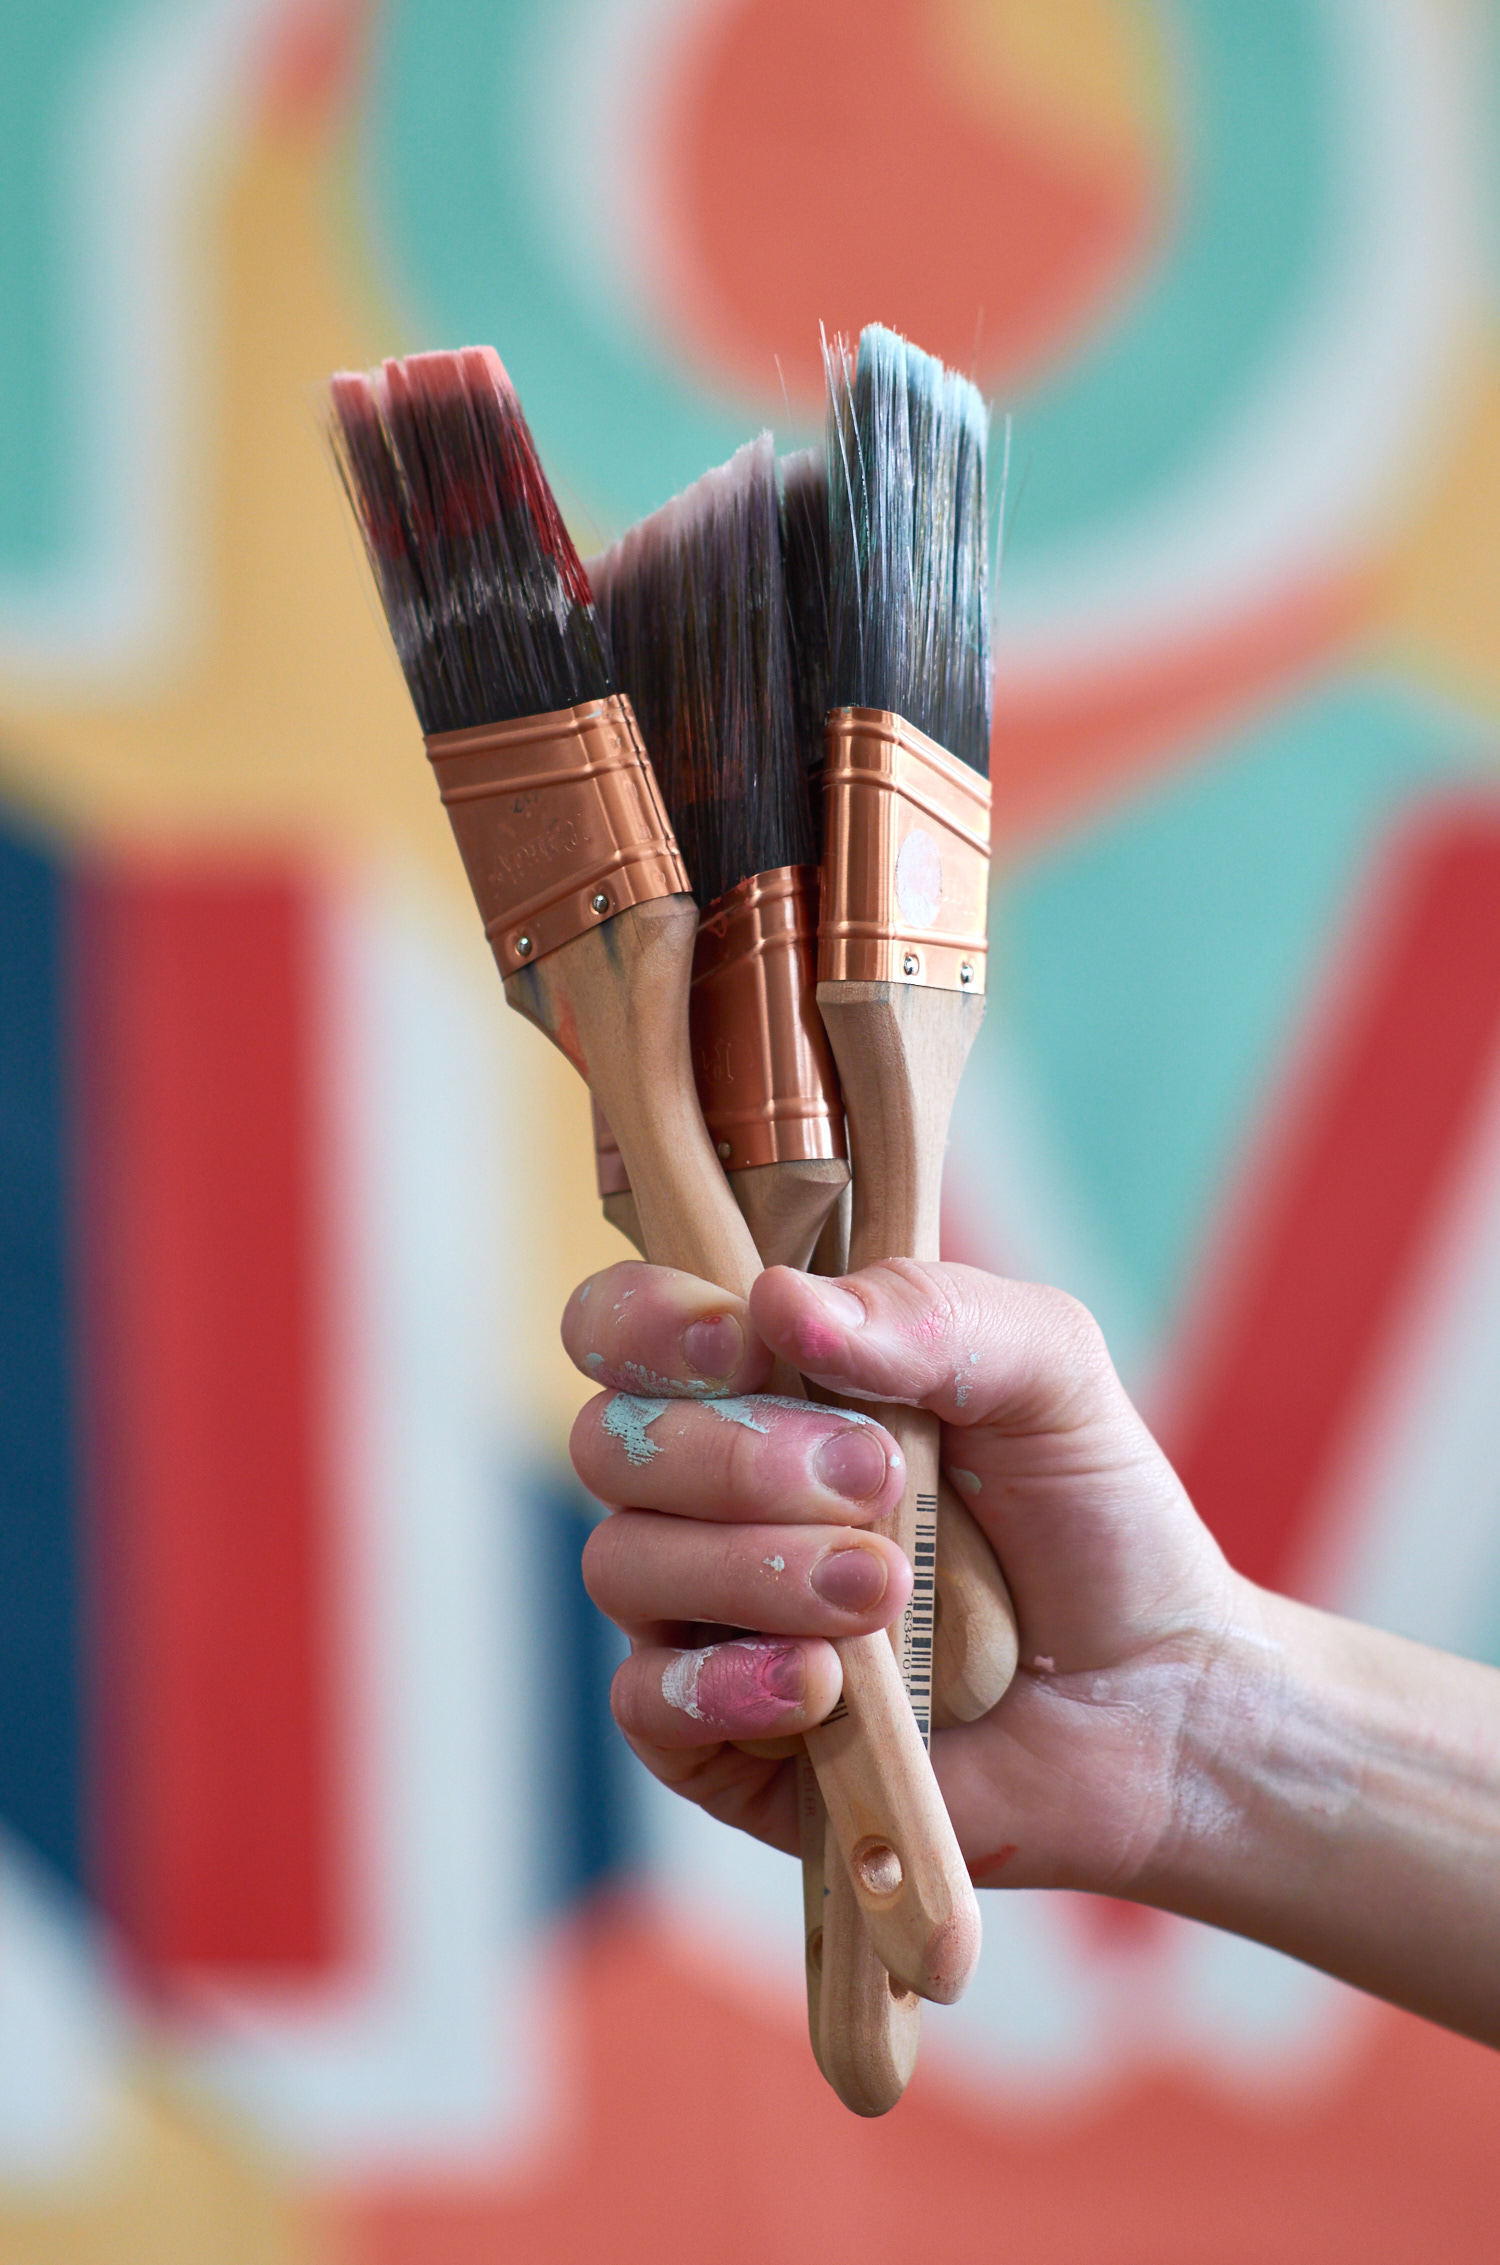 A person holding a handful of paint brushes.